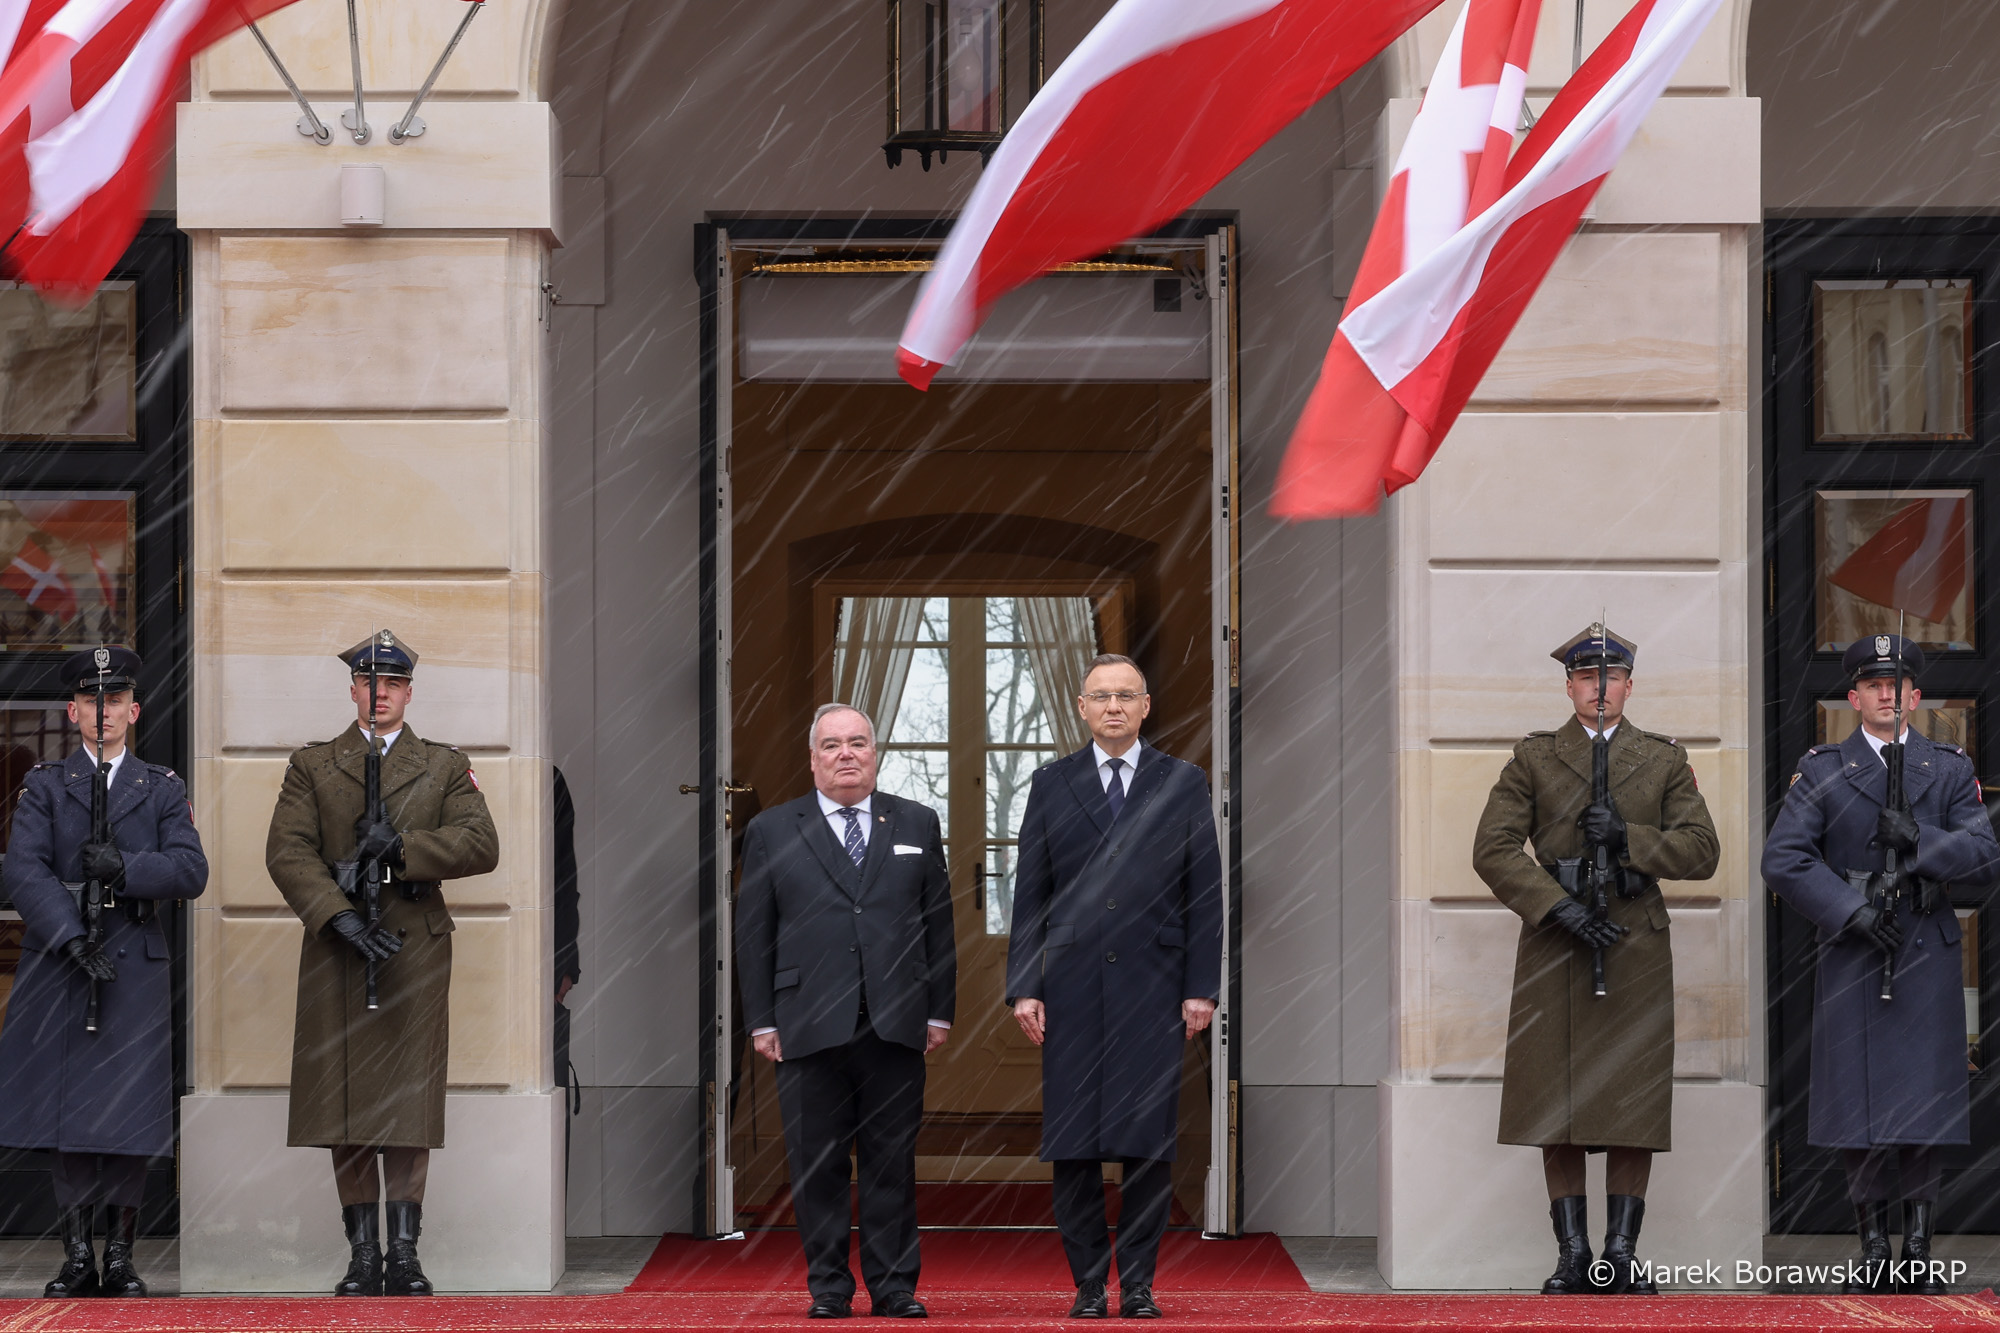 Official Visit of the Grand Master to Poland